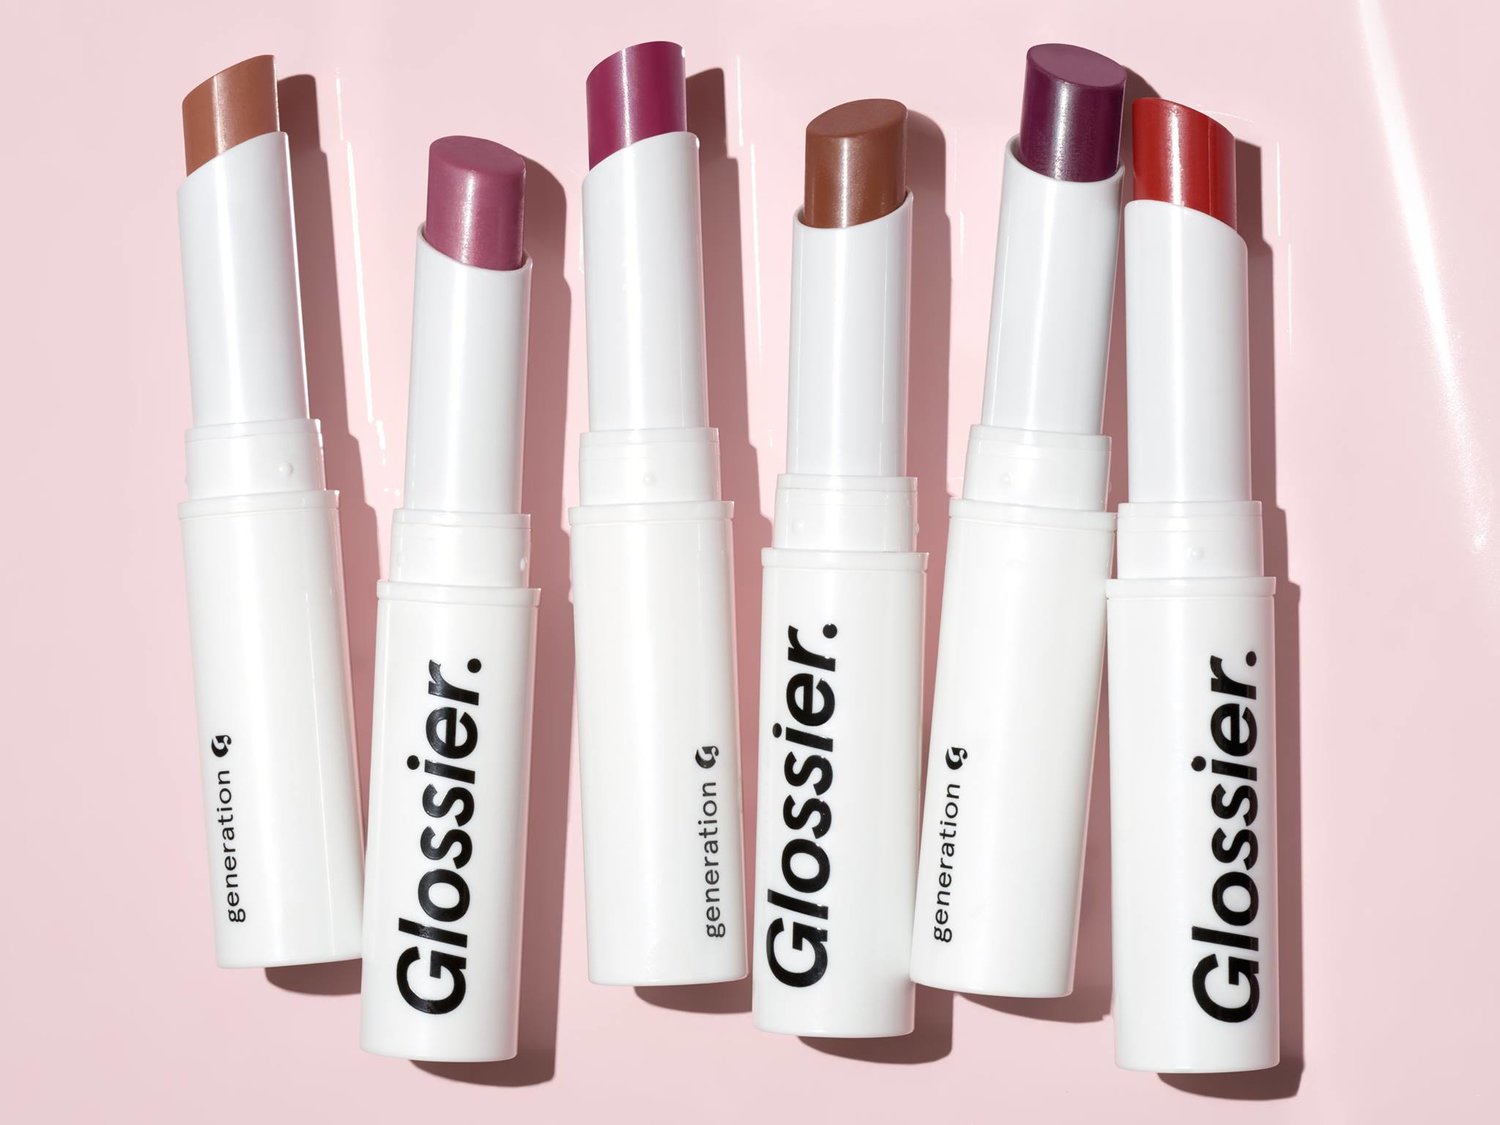 Why Beauty's Challenger Brands Need to Rev Up Growth